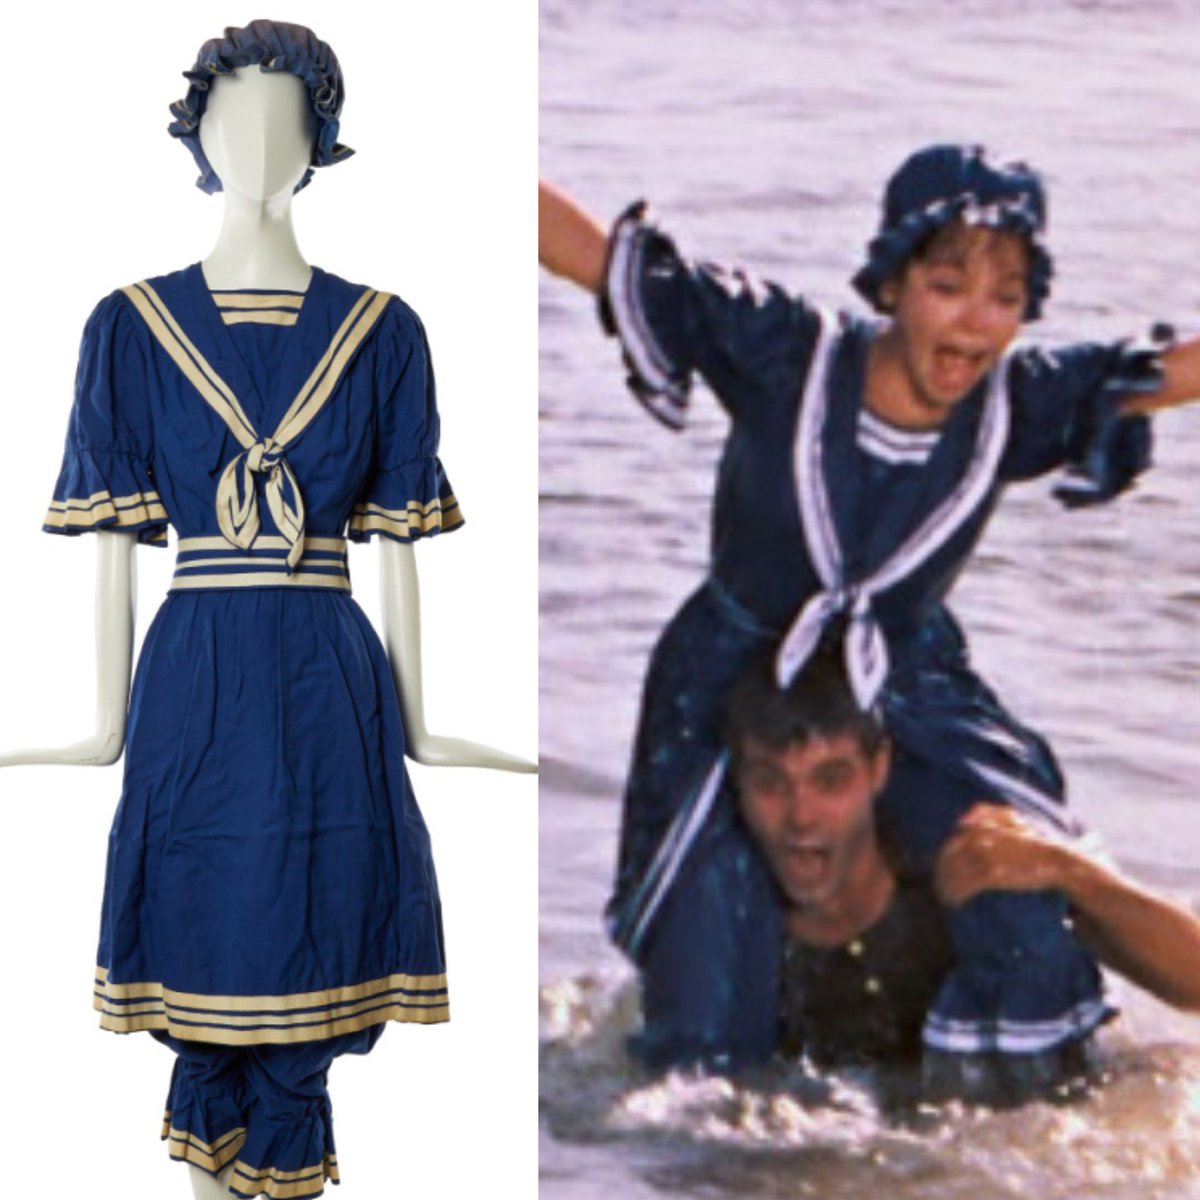 Cecil Beaton won the Best Costume Design Academy Award for Gigi at the Oscars #OnThisDay in 1959. He designed this blue and white cotton bathing ensemble, made by Barbara Karinska, for Leslie Caron as Gigi in the film. Sold by @JuliensAuctions. #film #costume #dress